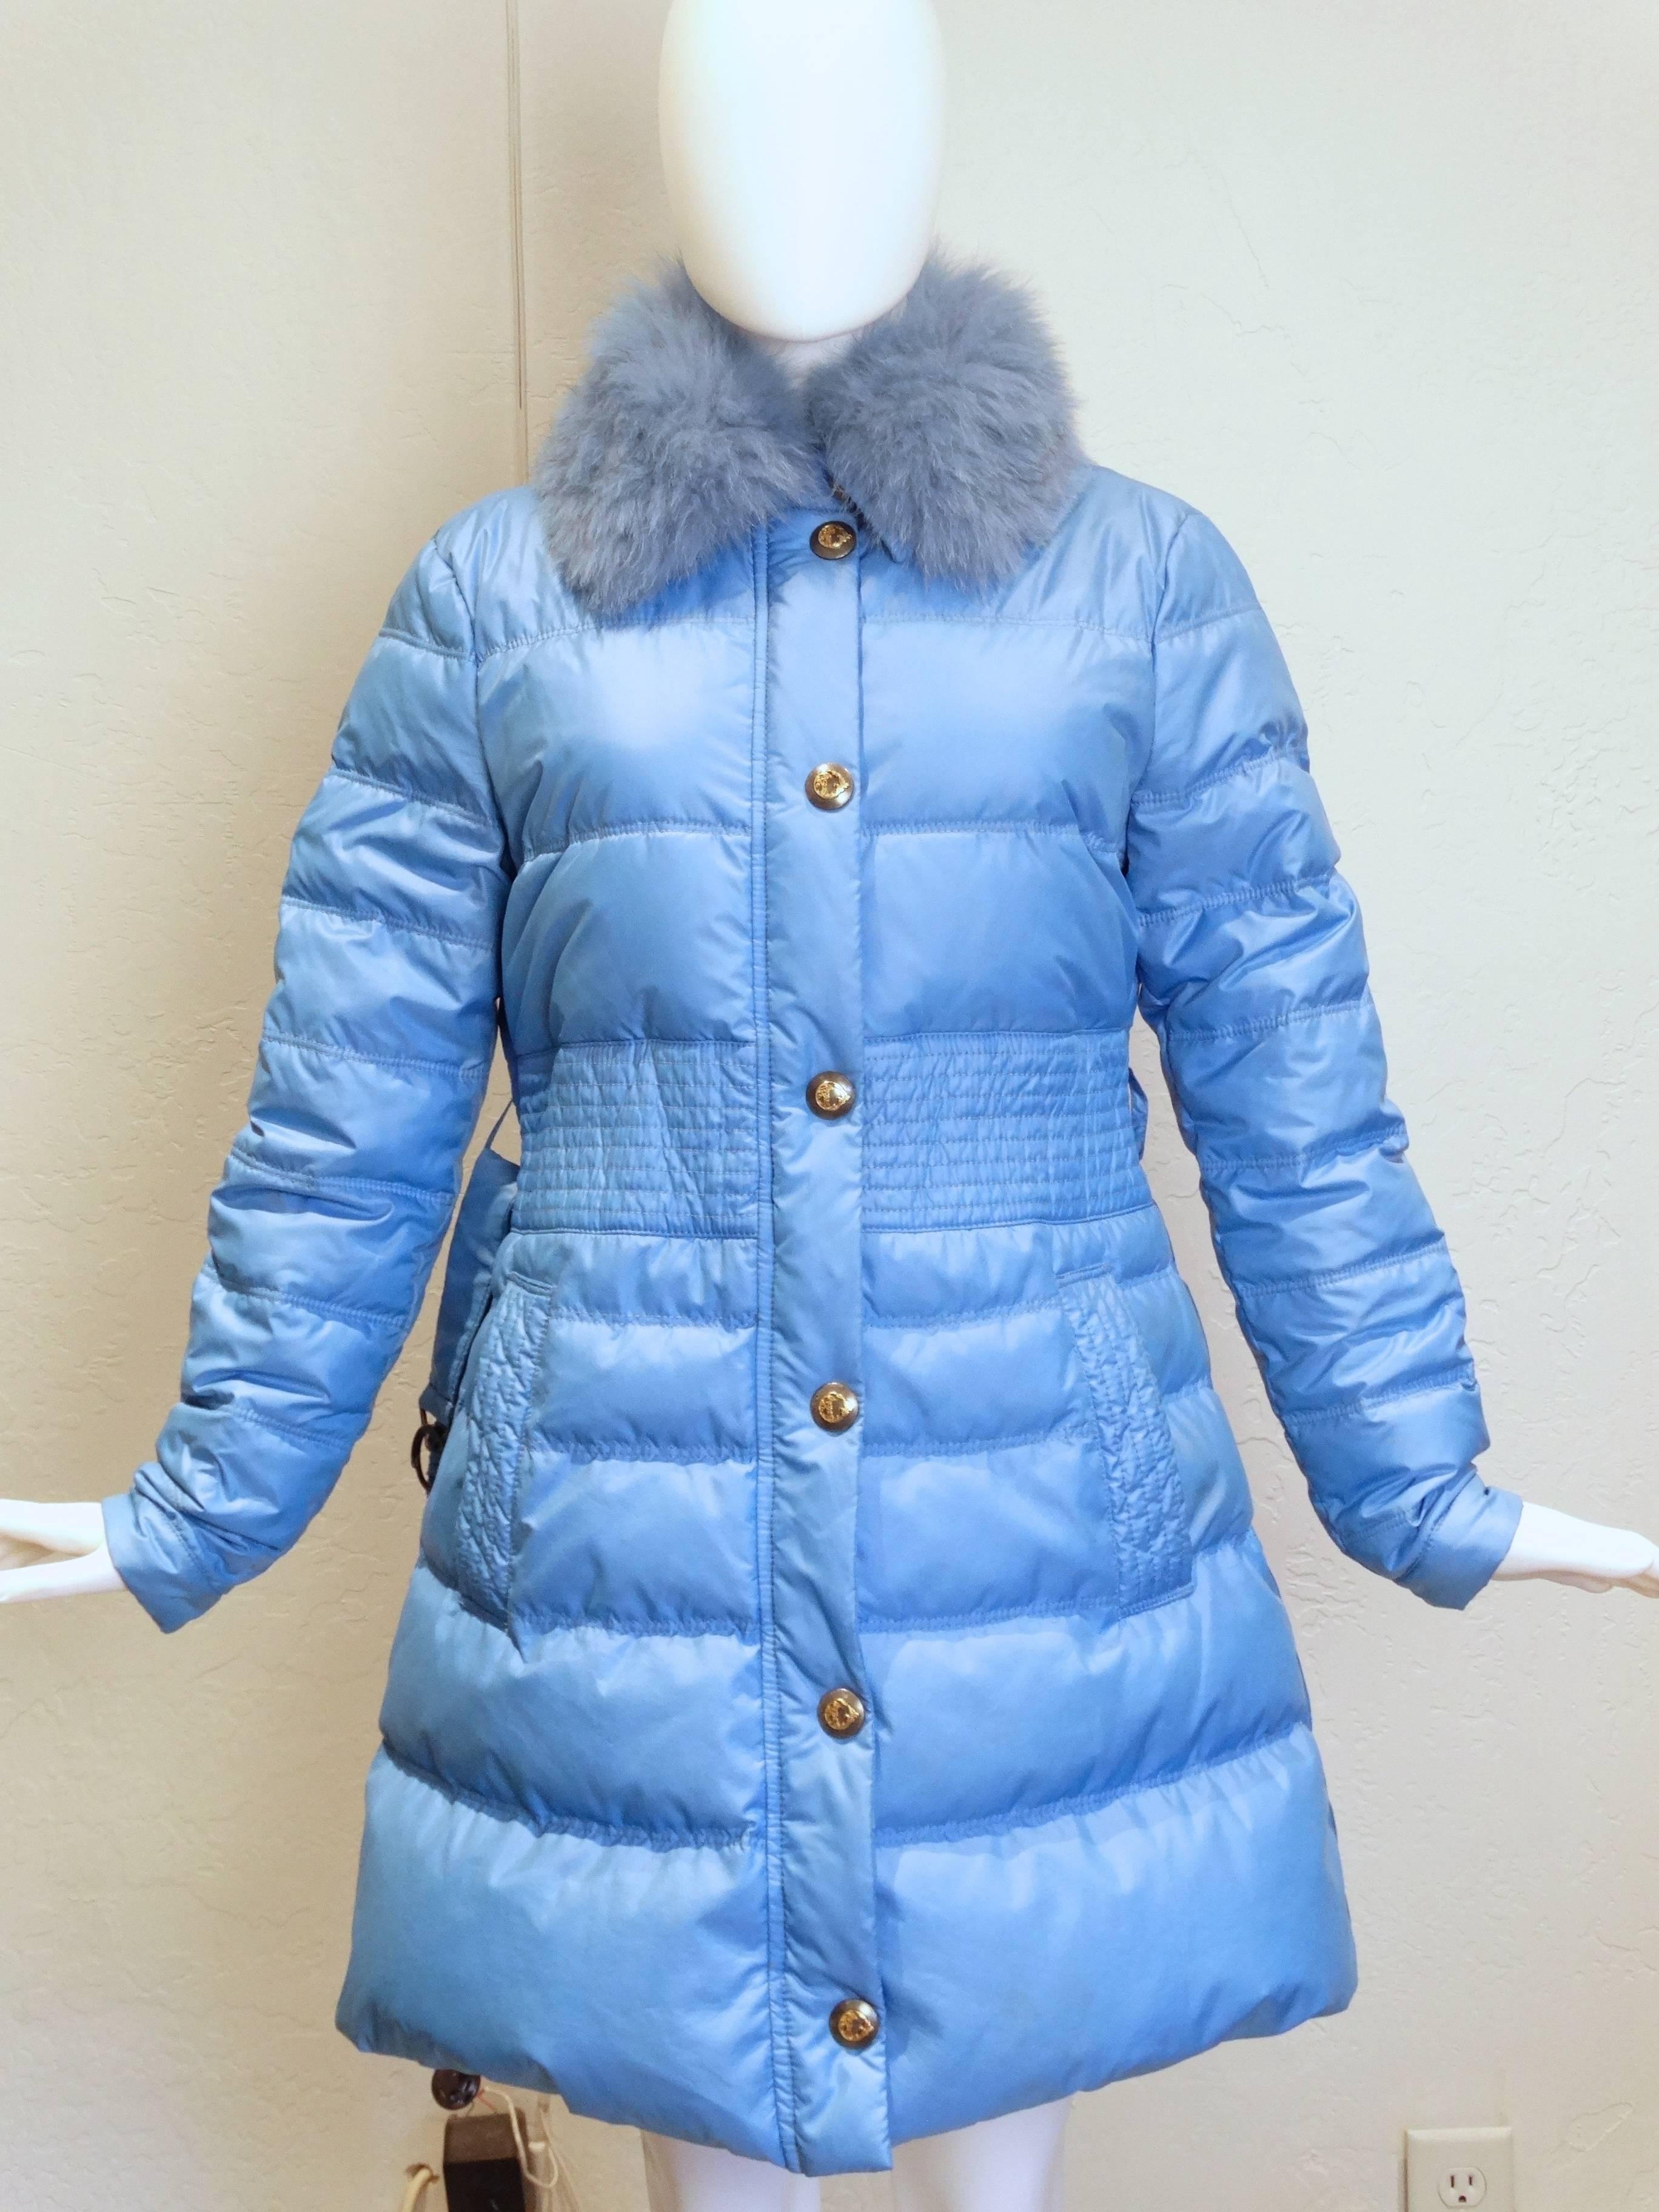 Blue 2013 Versace Collection Puffer Jacket with Fur Collar 